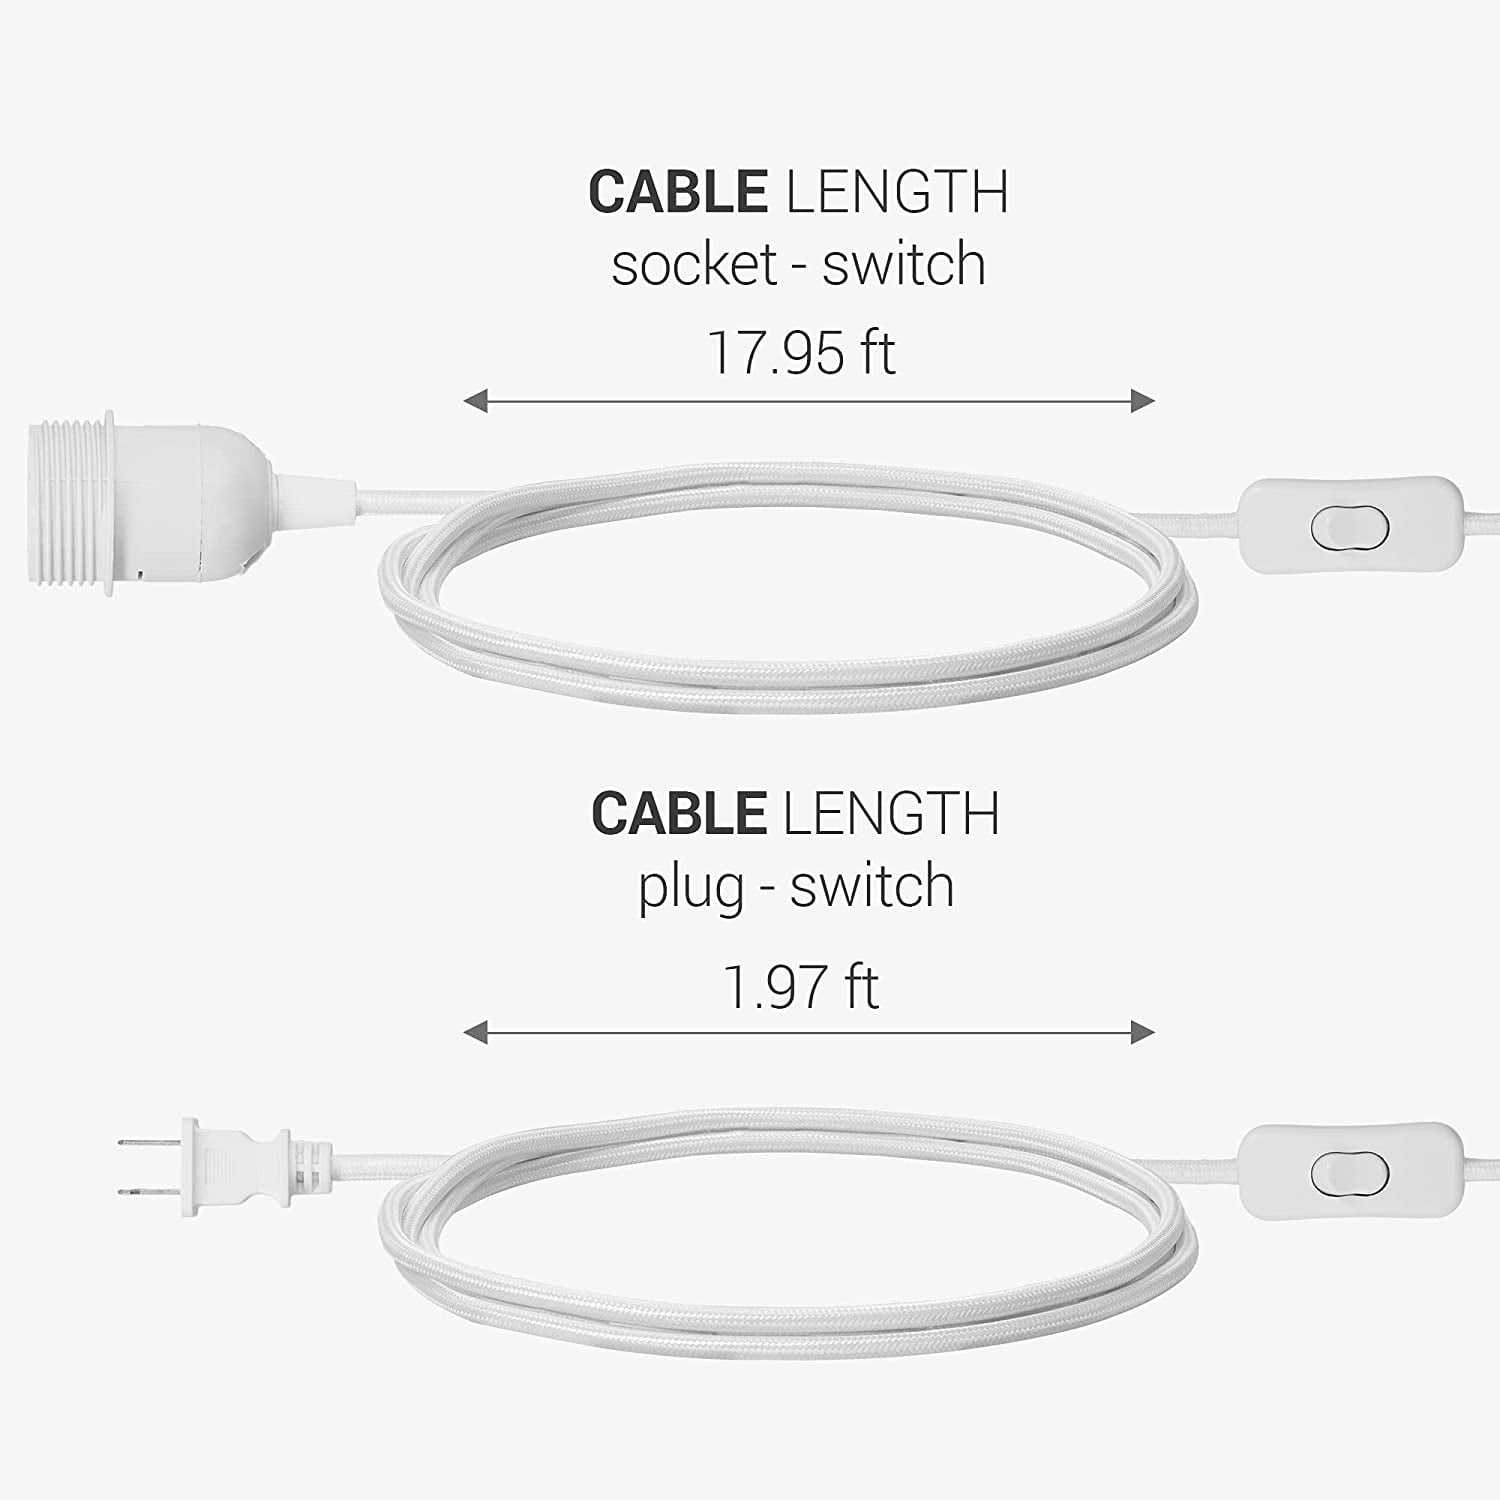 for Hanging DIY Ceiling Lighting E26 Socket kwmobile Plug-in Light Cord 15ft Long Fabric Pendant Lamp Cable with Plug White